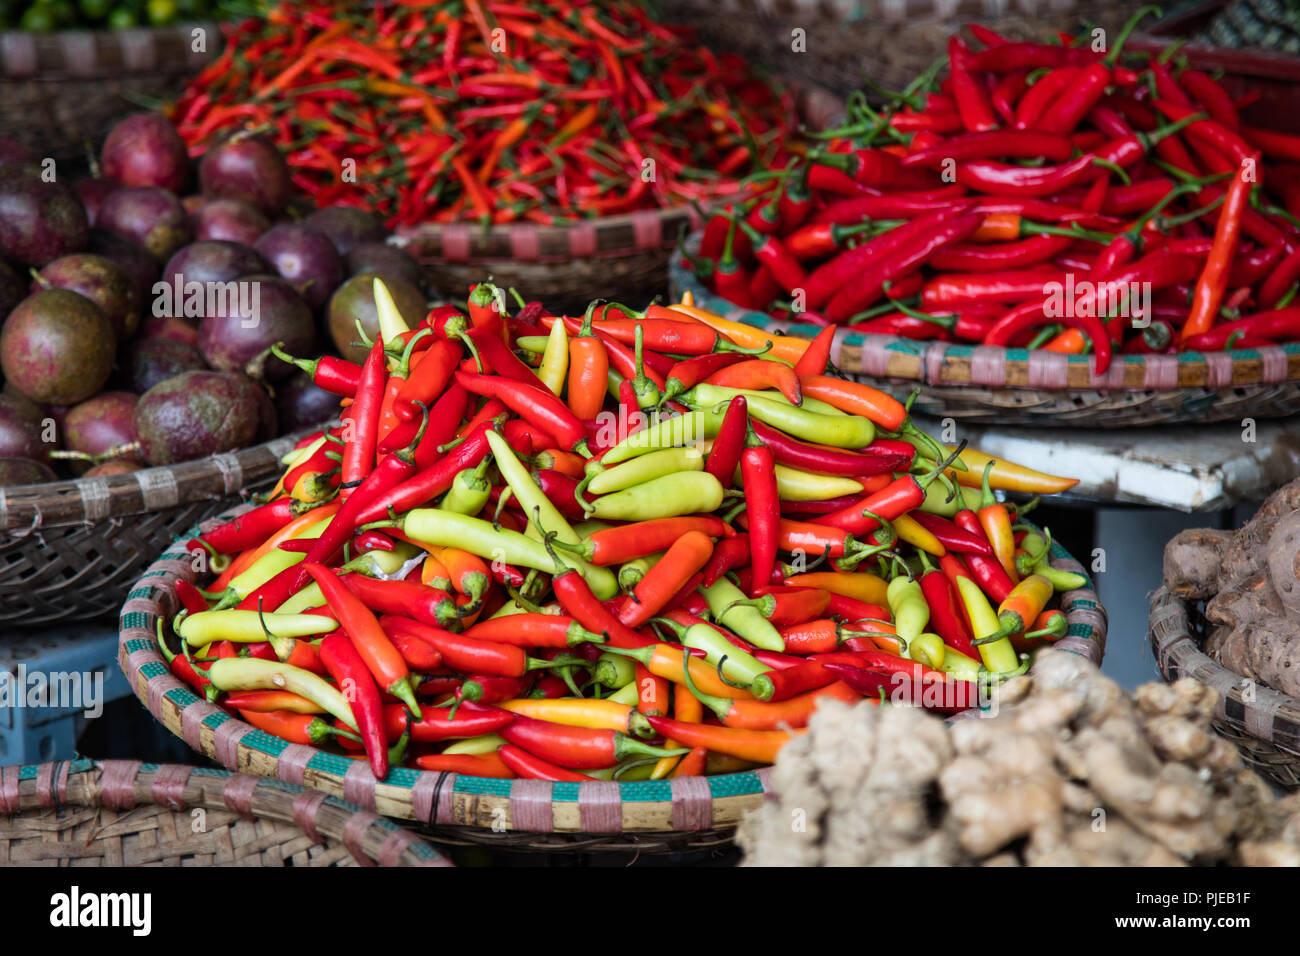 Baskets of fresh chili peppers at the market in Hanoi, Vietnam Stock Photo